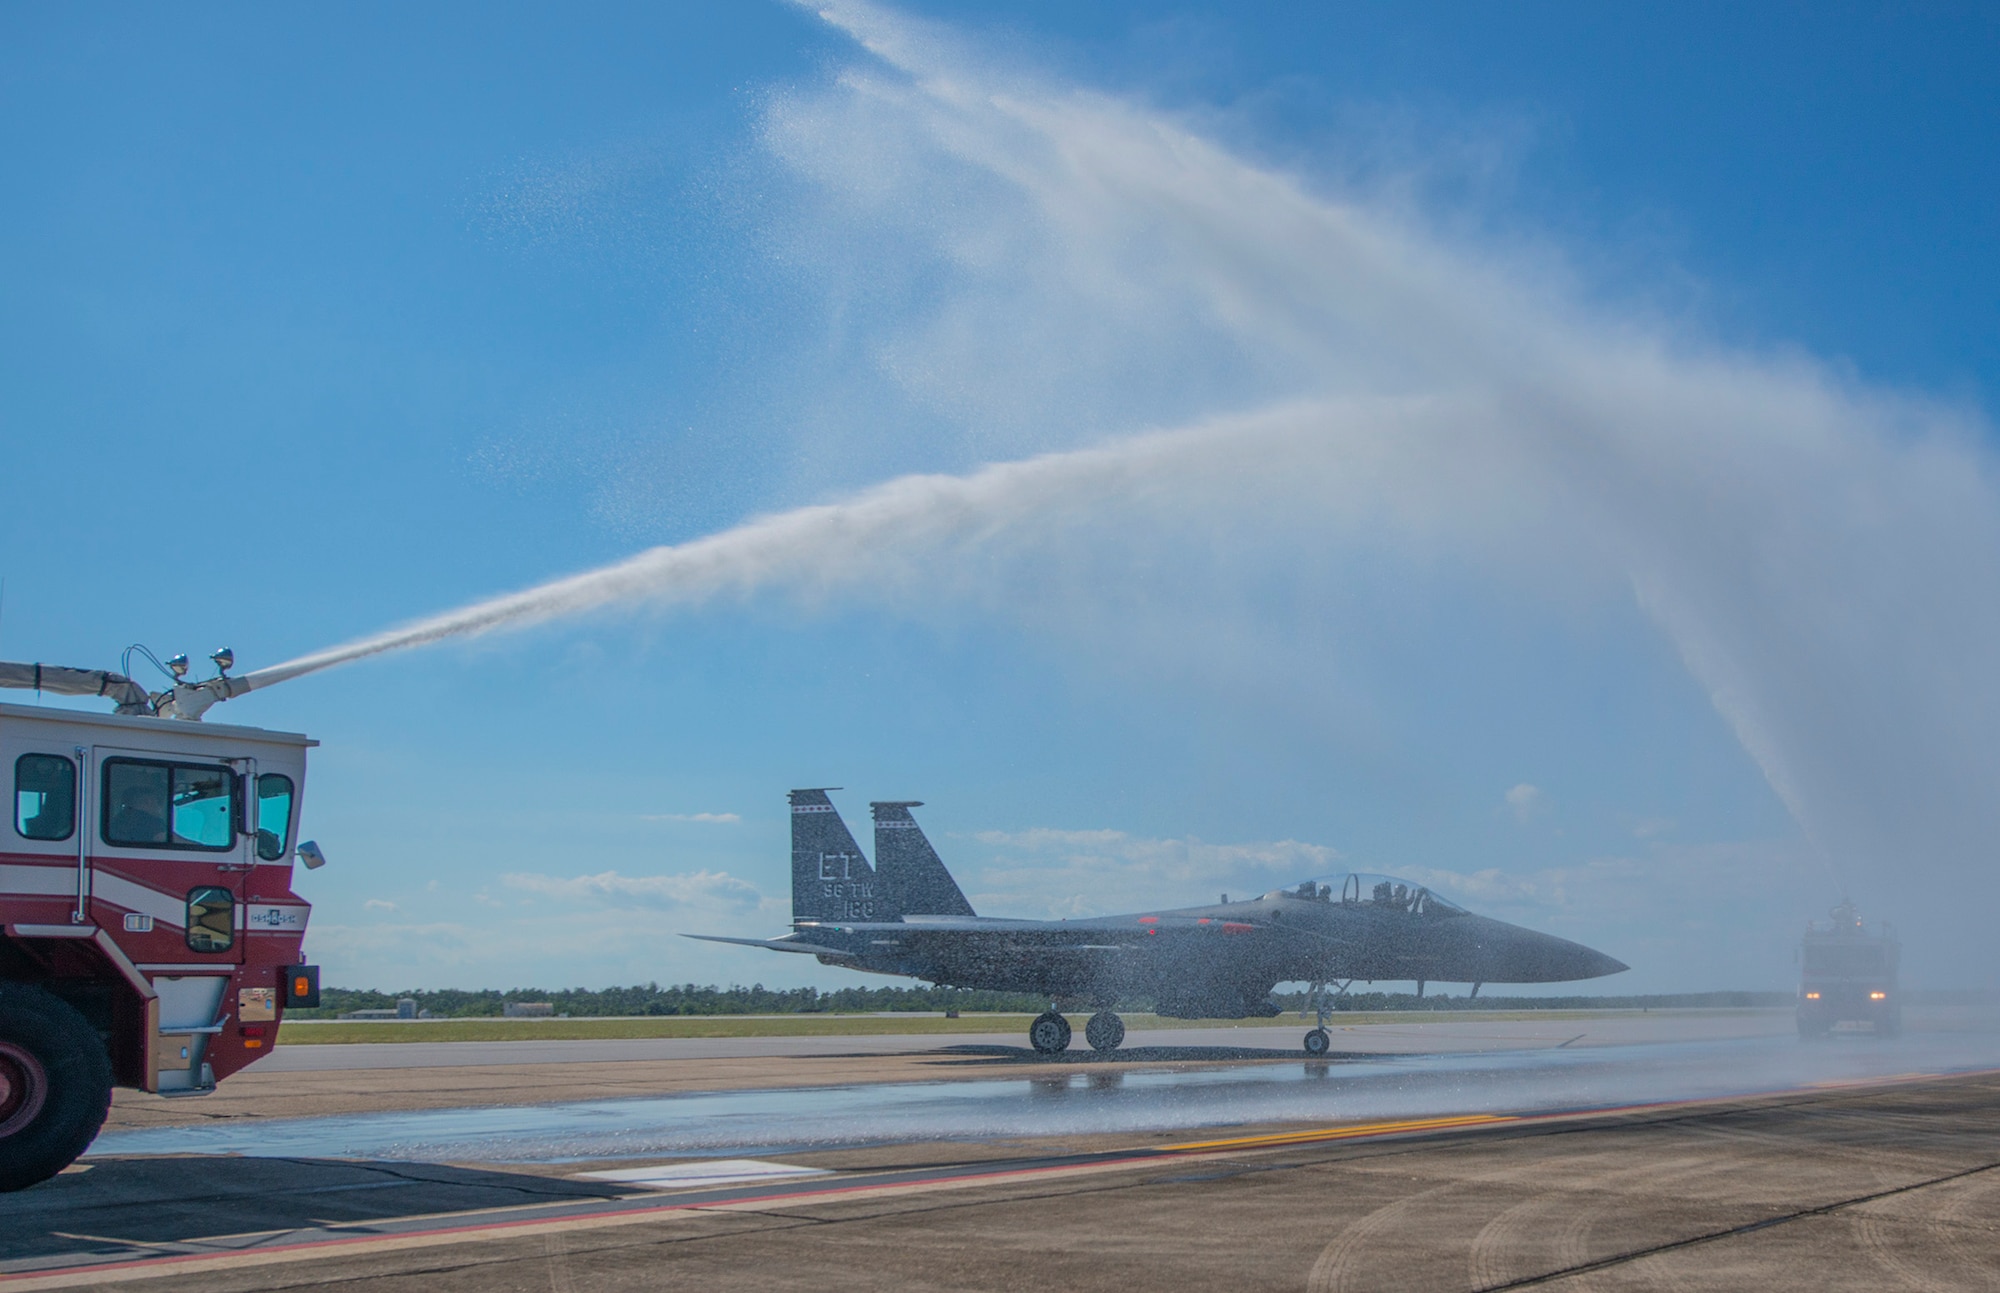 Fire engines from the 96th Civil Engineer Group flank Brig. Gen. Christopher Azzano’s F-15 Eagle while they hose down the aircraft during his fini flight at Eglin Air Force Base, Fla. May 15. The fini flight is a symbol of a member’s final flight with the unit or base. Azzano’s new assignment will take him to Wright-Patterson Air Force Base in Ohio to take command of the Directorate of Air, Space and Cyberspace Operations. (U.S. Air Force photo/Ilka Cole) 